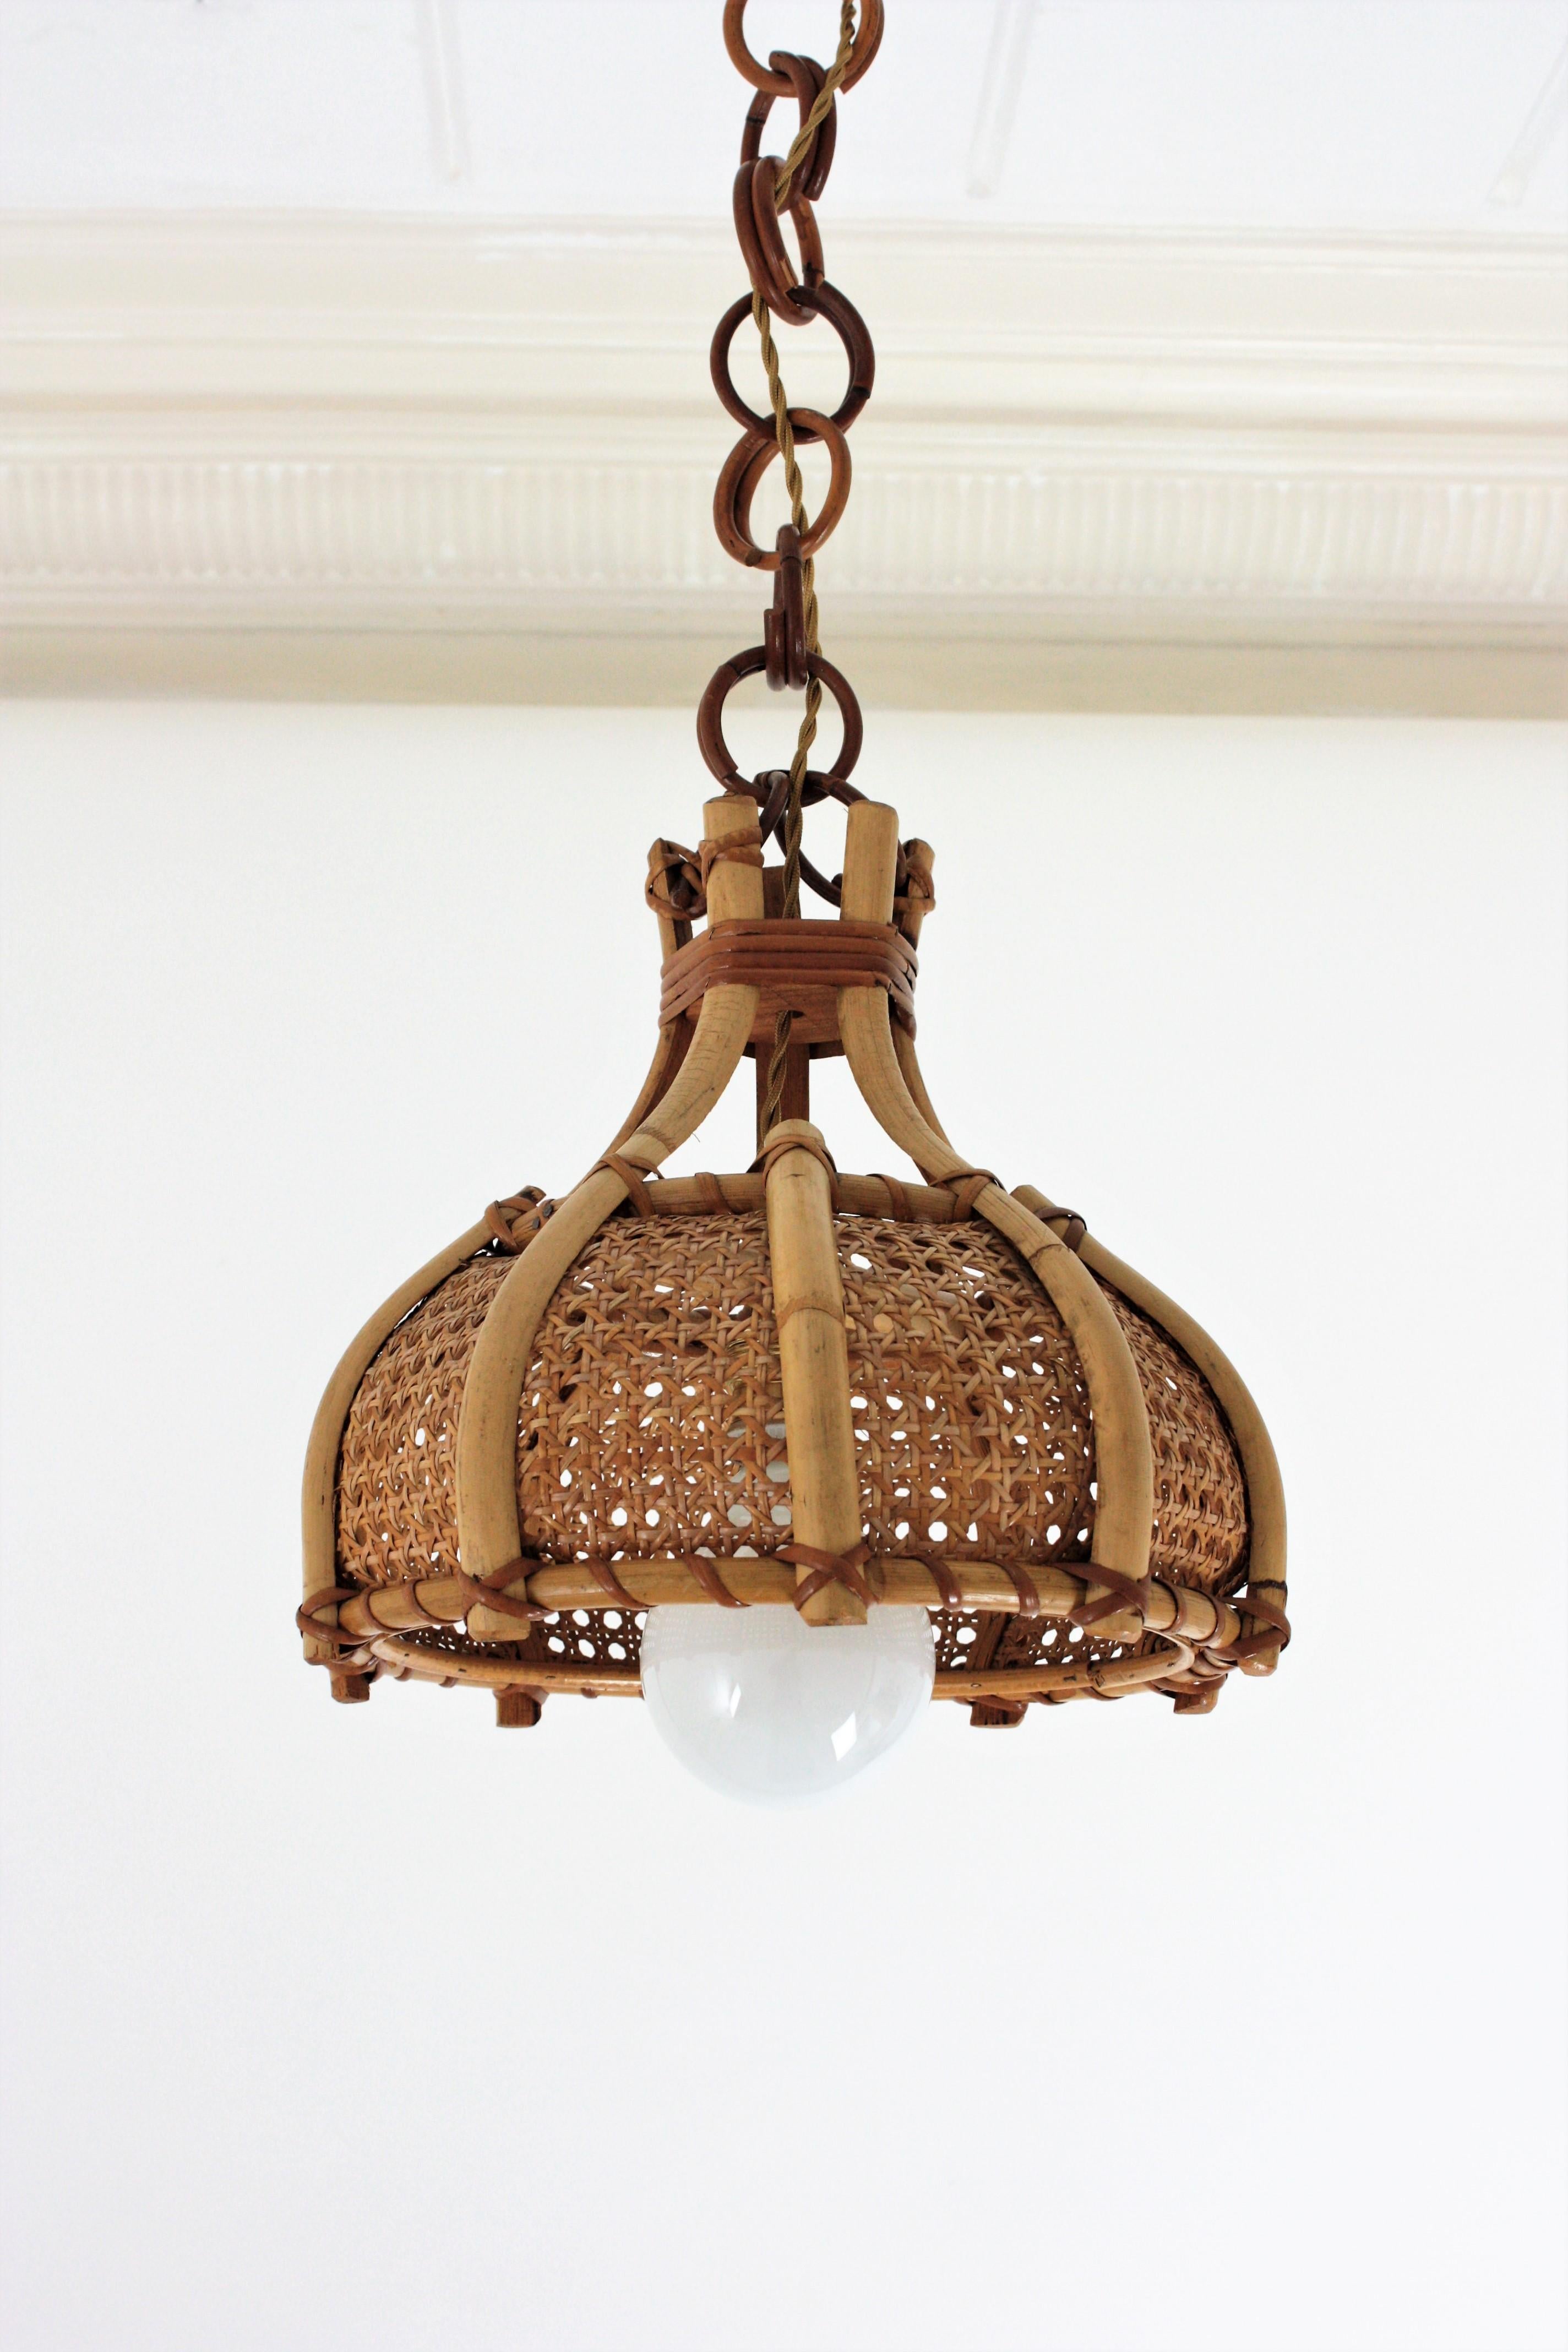 Italian Modernist Wicker Weave and Bamboo Bell Shaped Pendant, 1960s For Sale 10